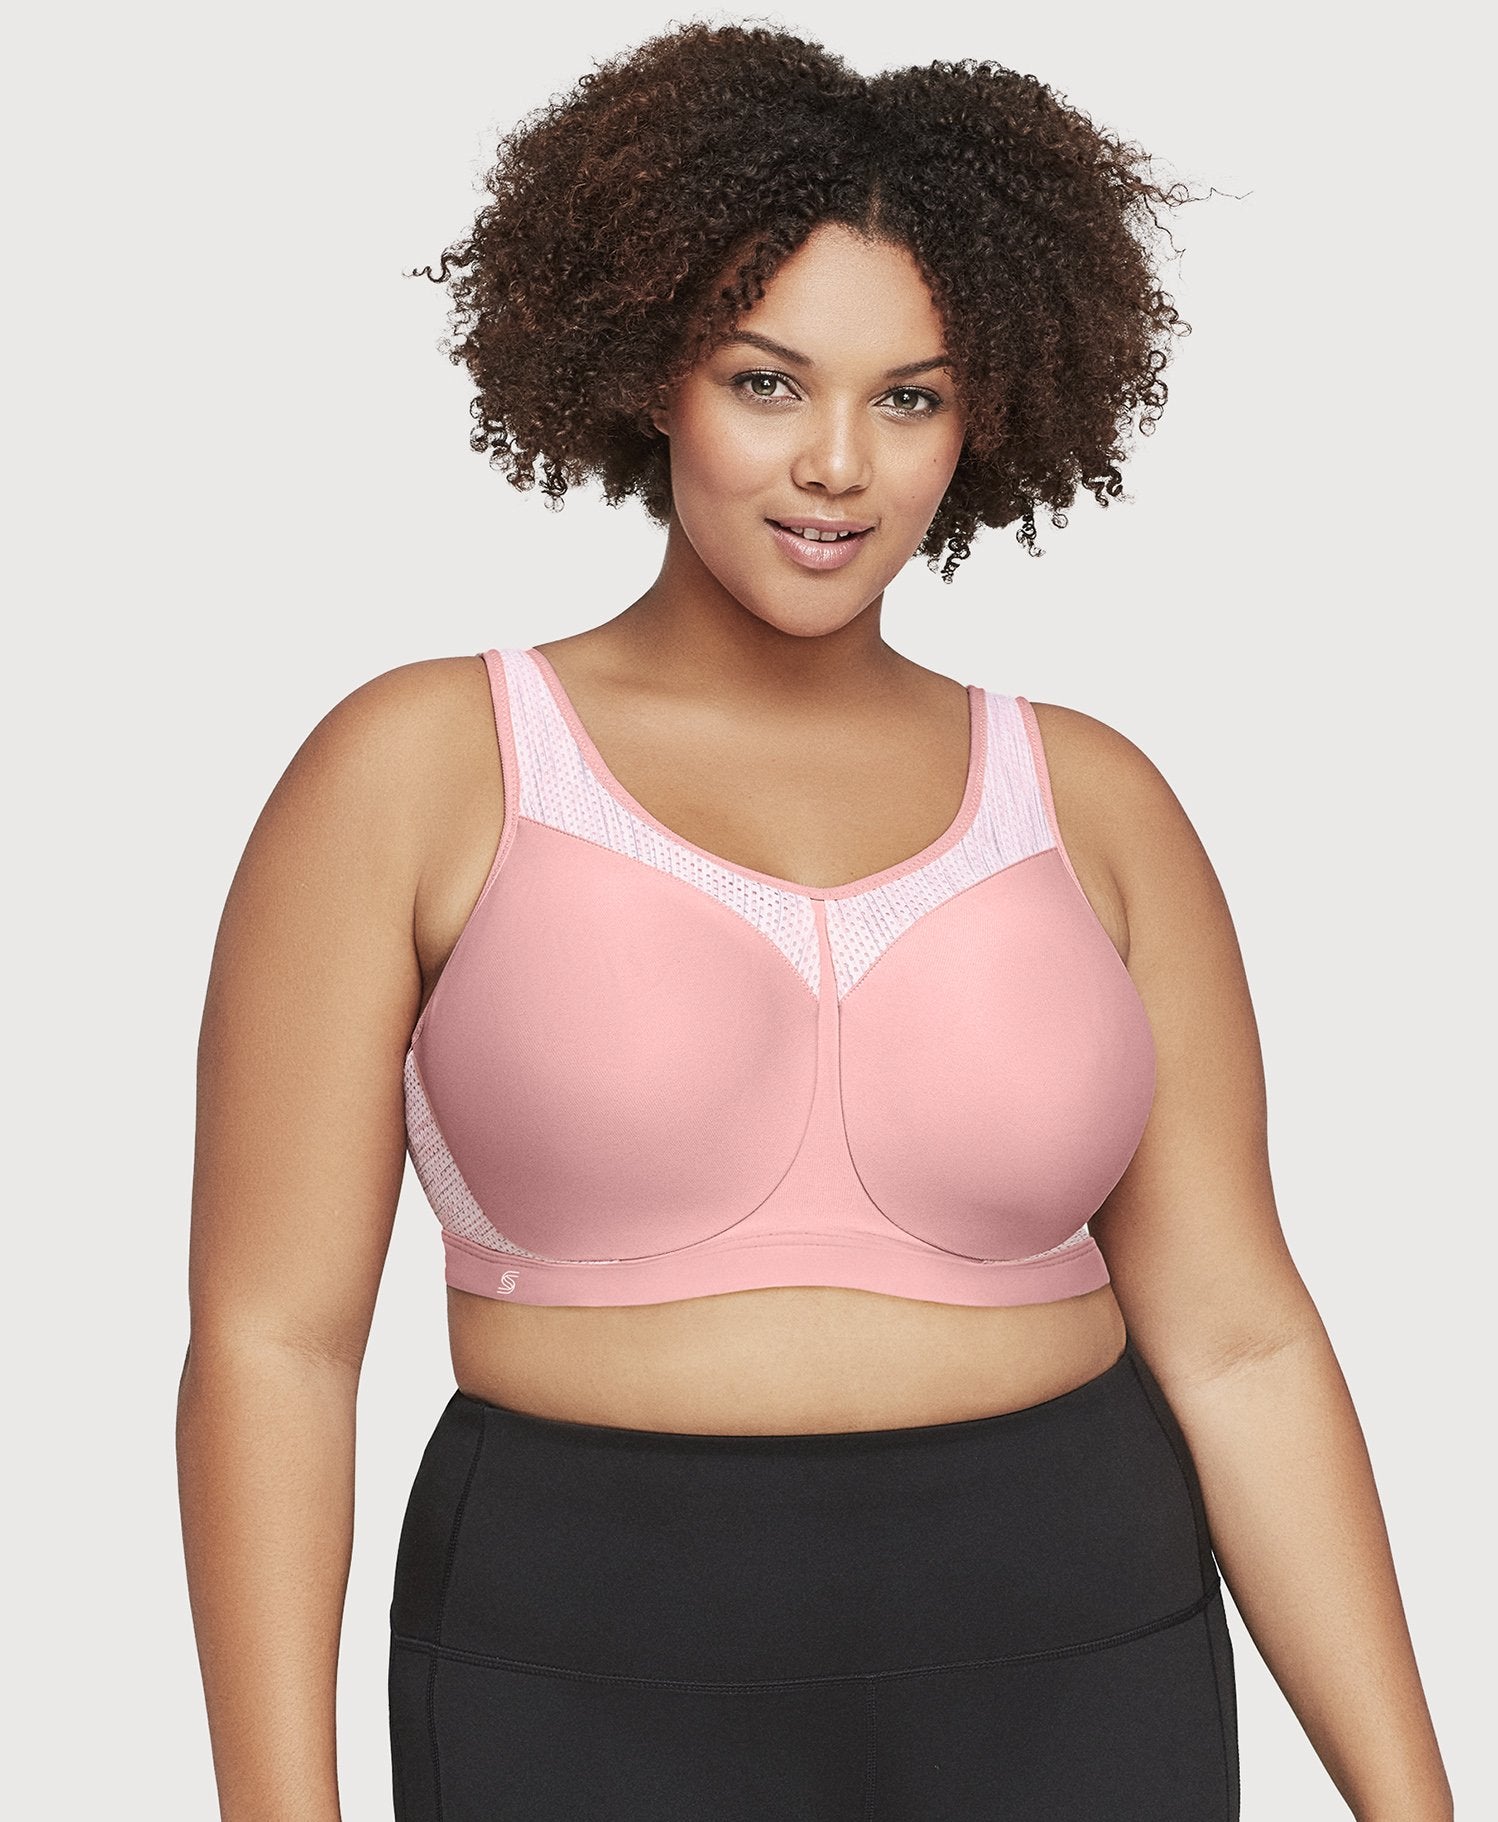 SELONE Sports Bras for Women Plus Size Zip Up High Impact Sports